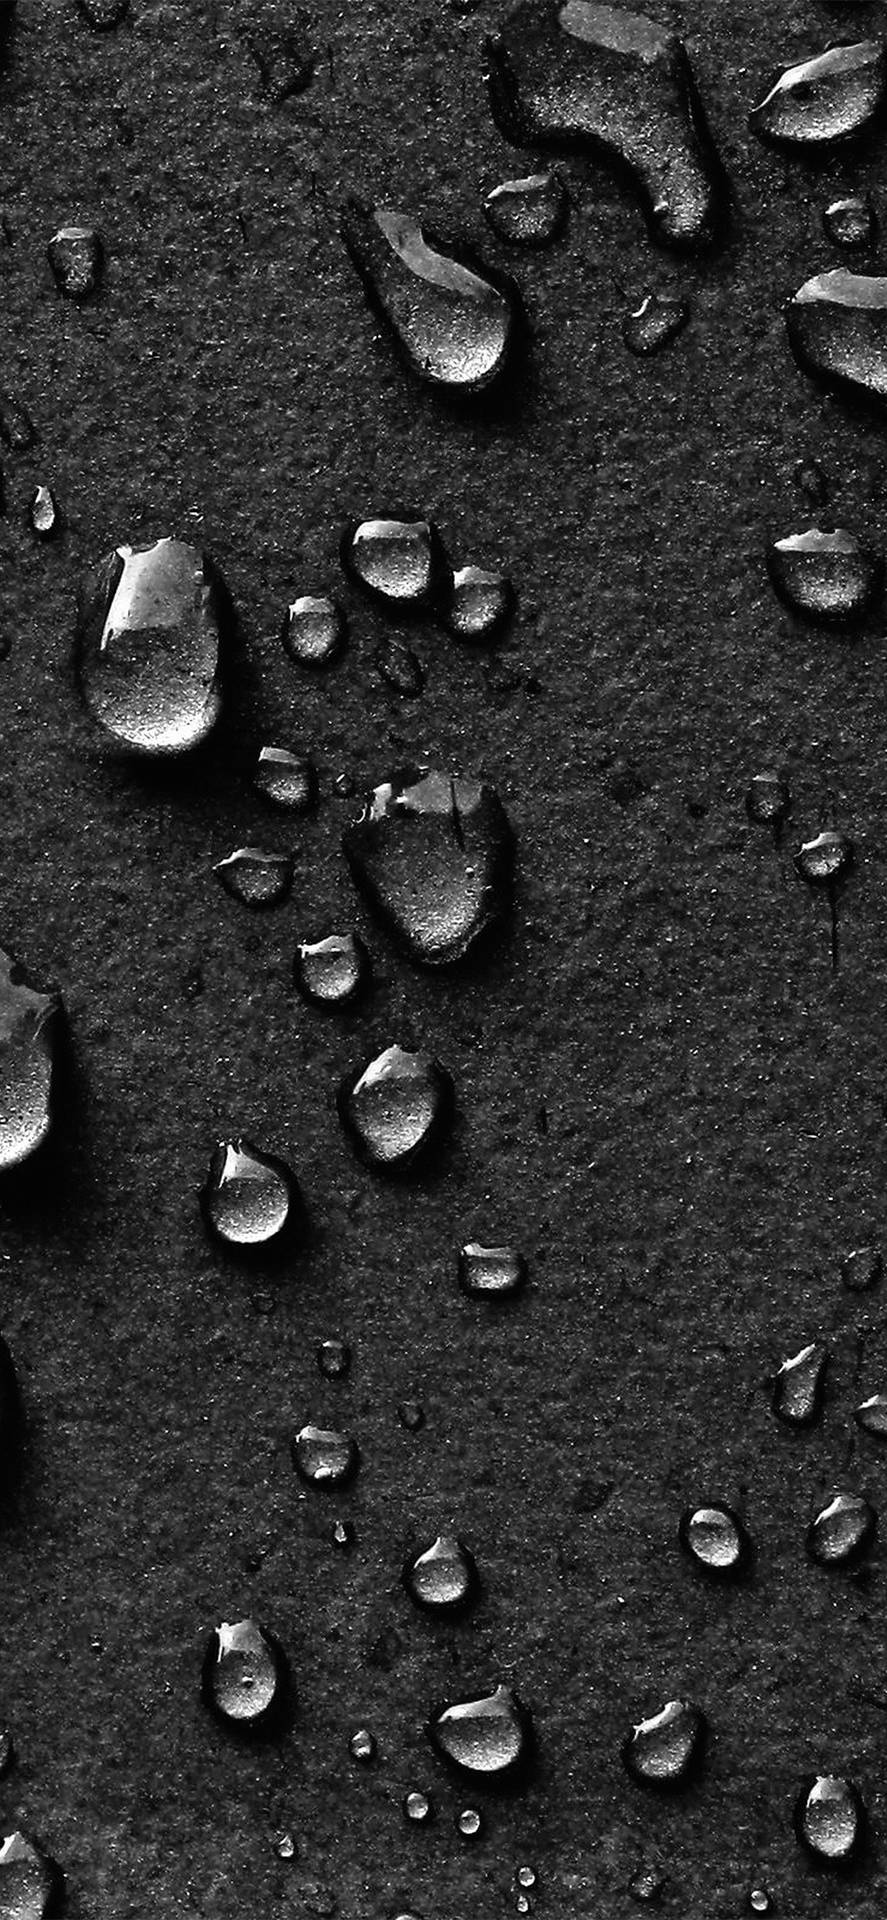 Black And White Photo Of Water Droplets On A Surface Wallpaper